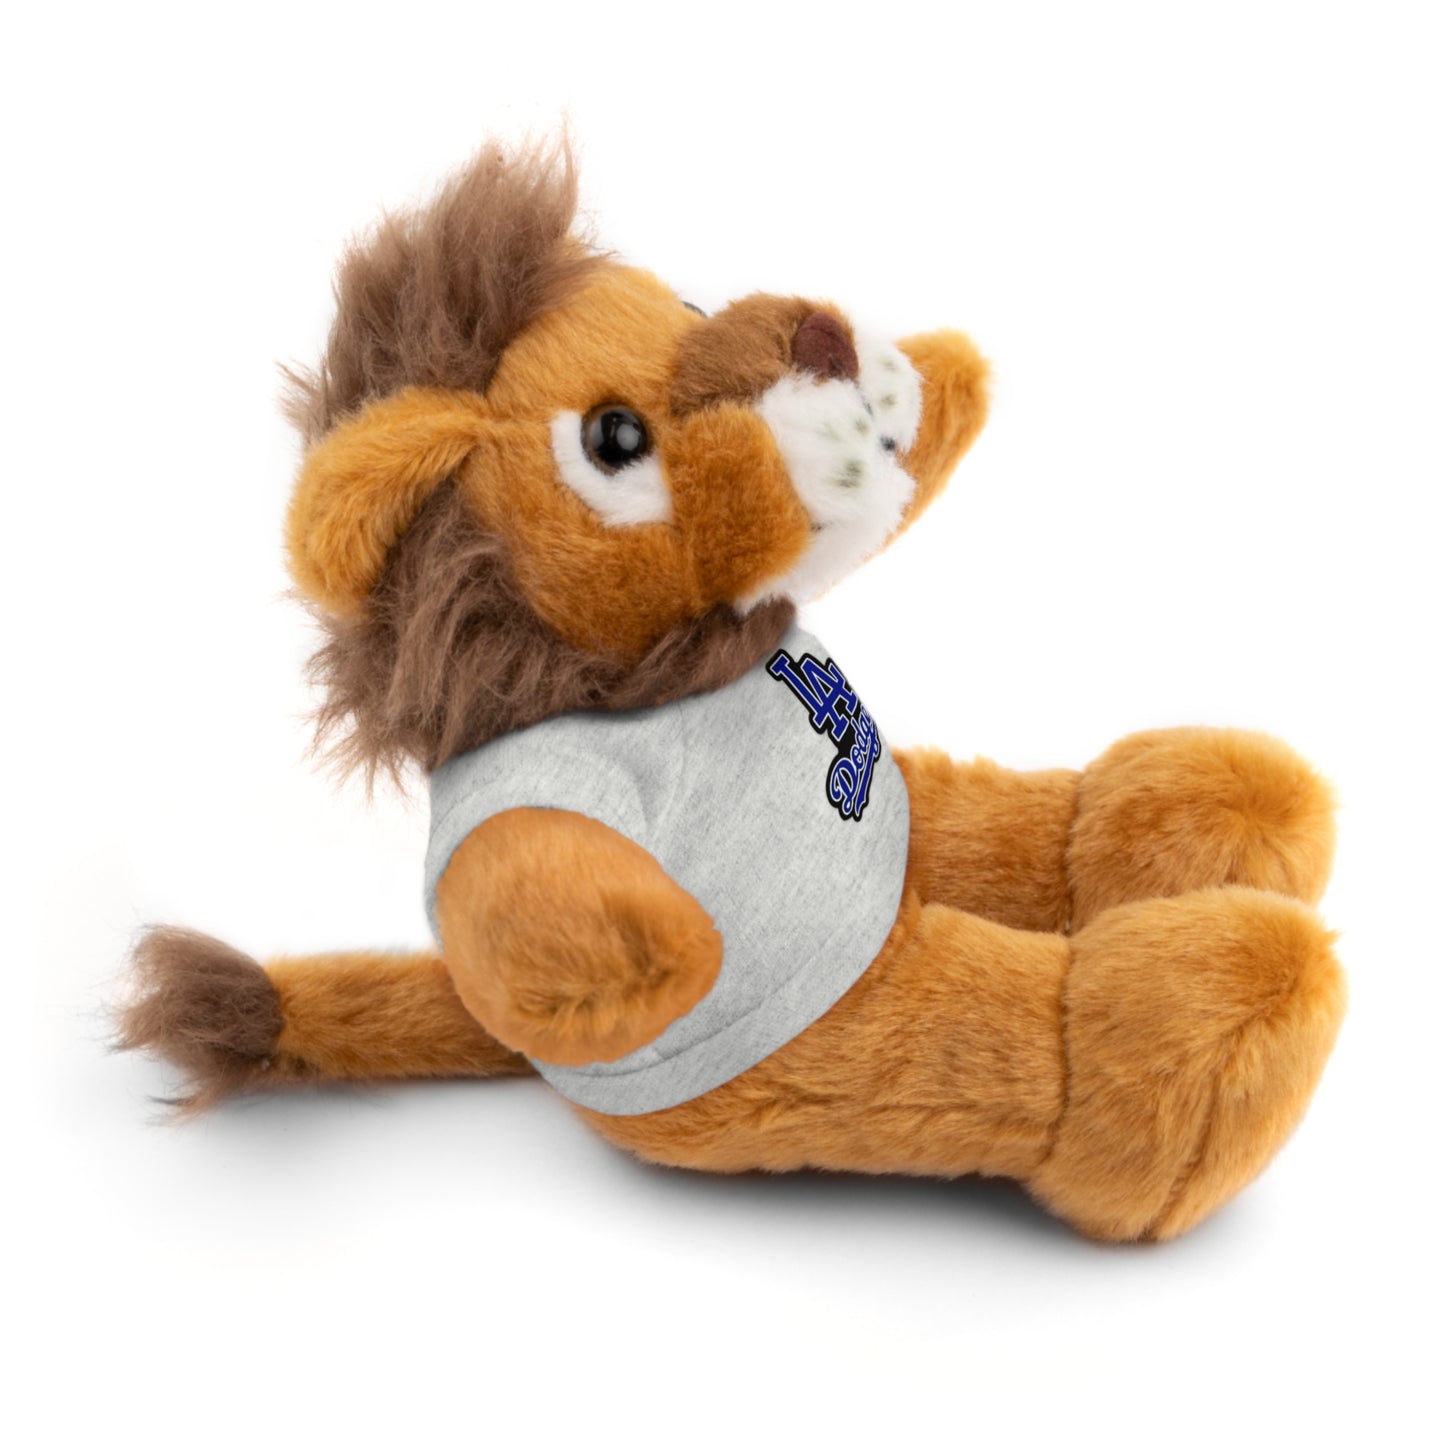 Los Angeles Dodgers - Stuffed Animals with Tee